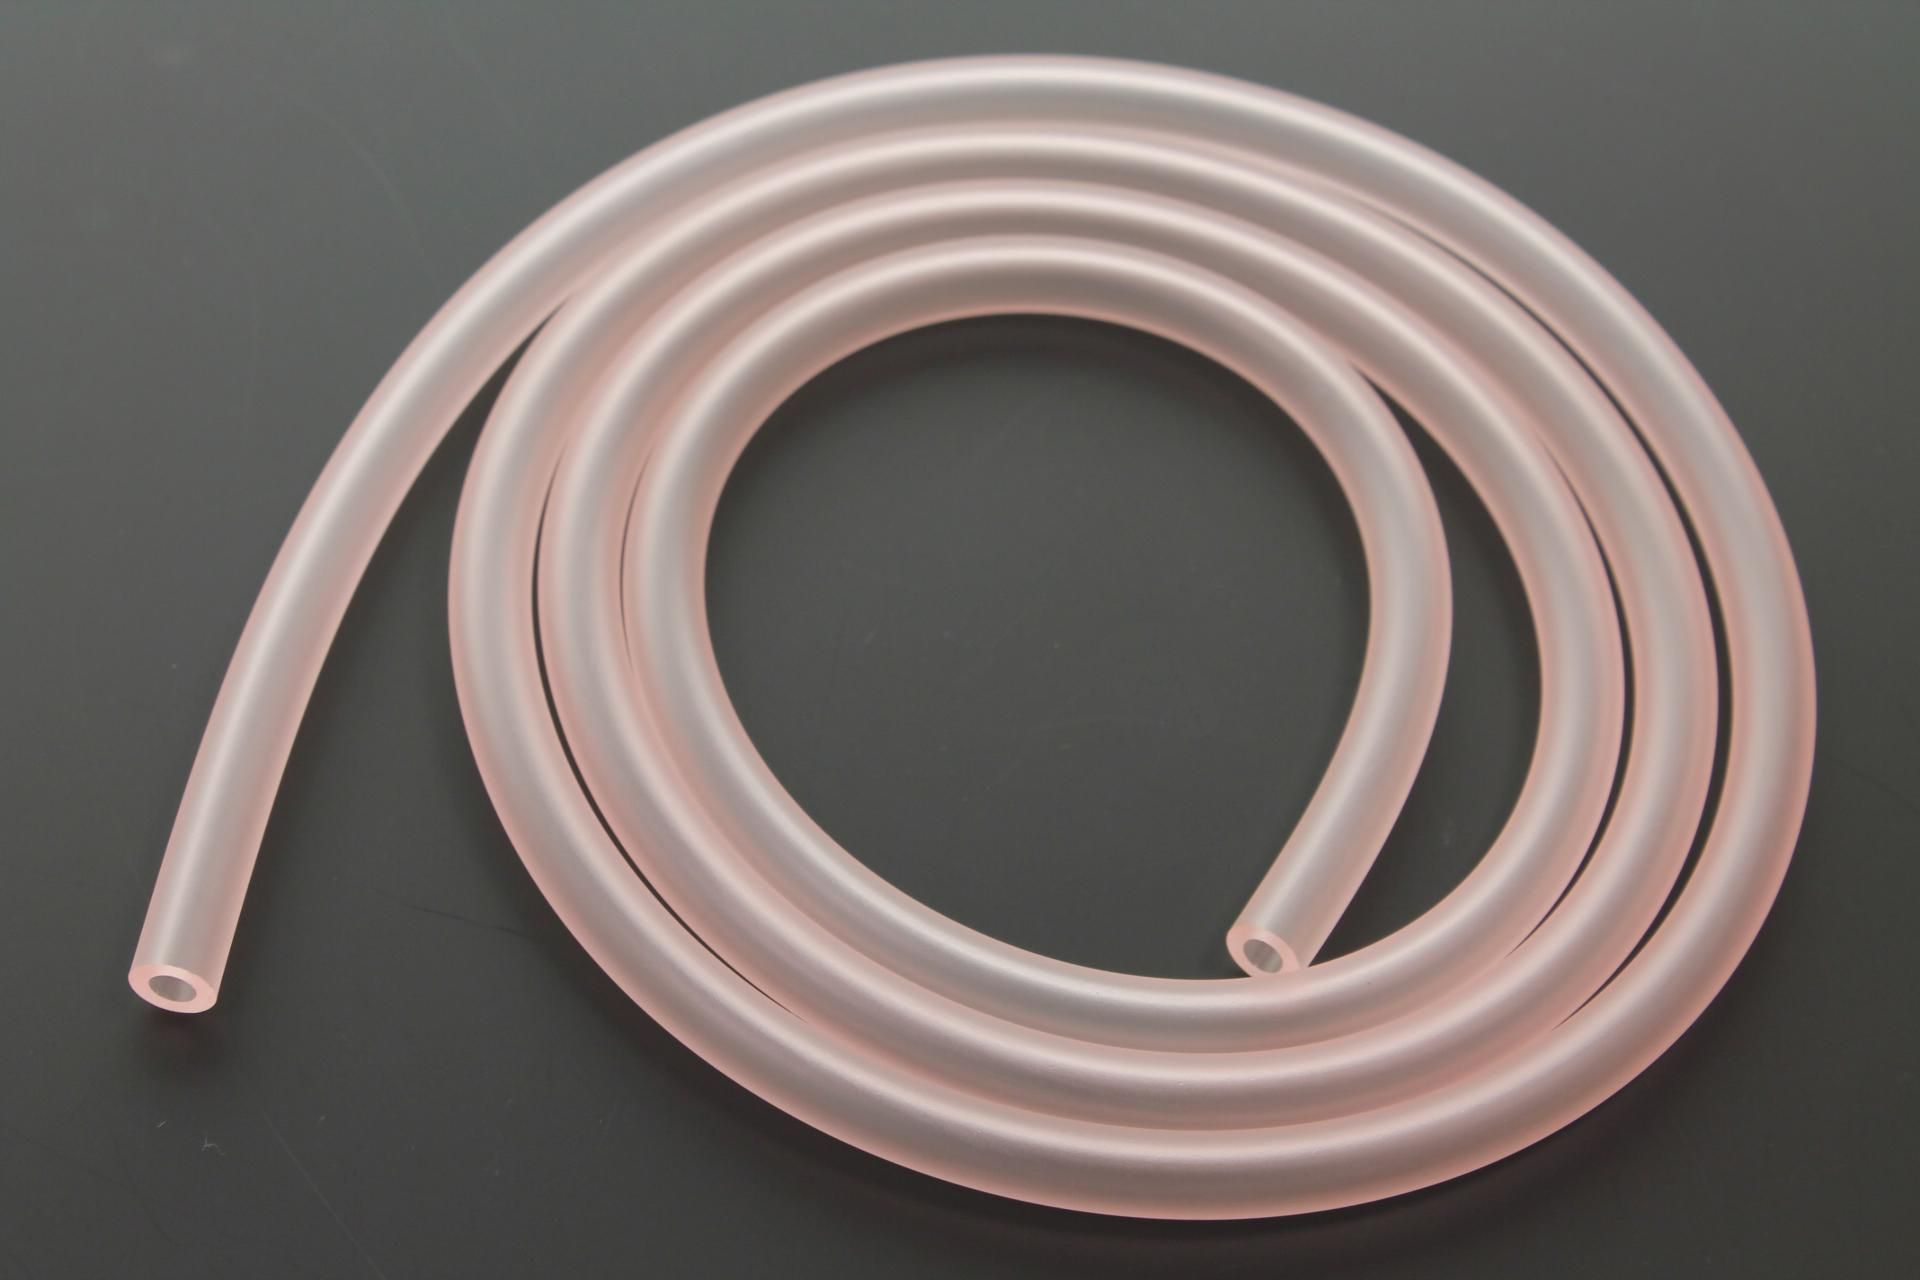 91A20-05140-00 Superseded by 91A20-05145-00 - TUBE, FLEXIBLE